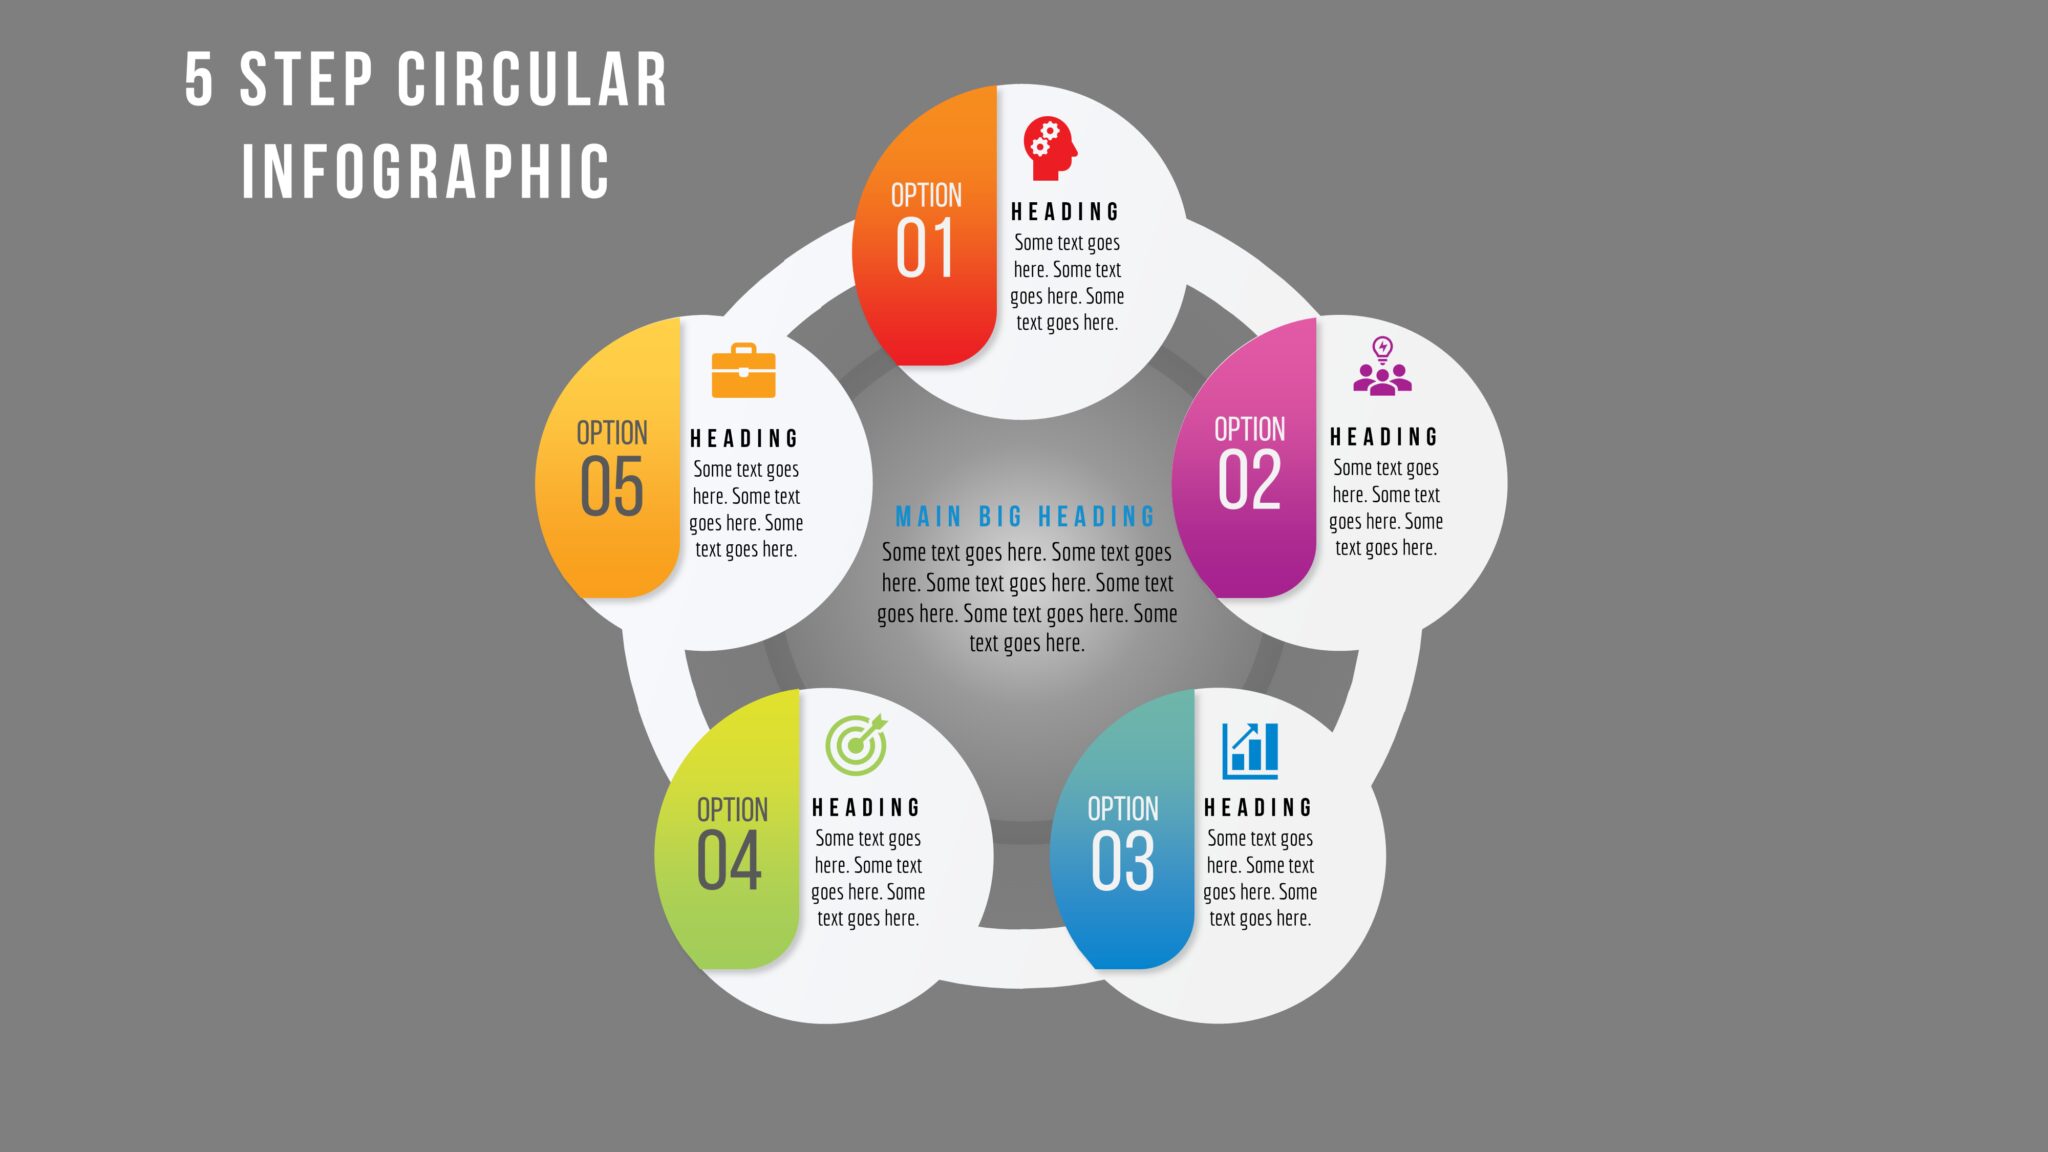 36powerpoint 5 Step Circular Infographic Powerup With Powerpoint 6365